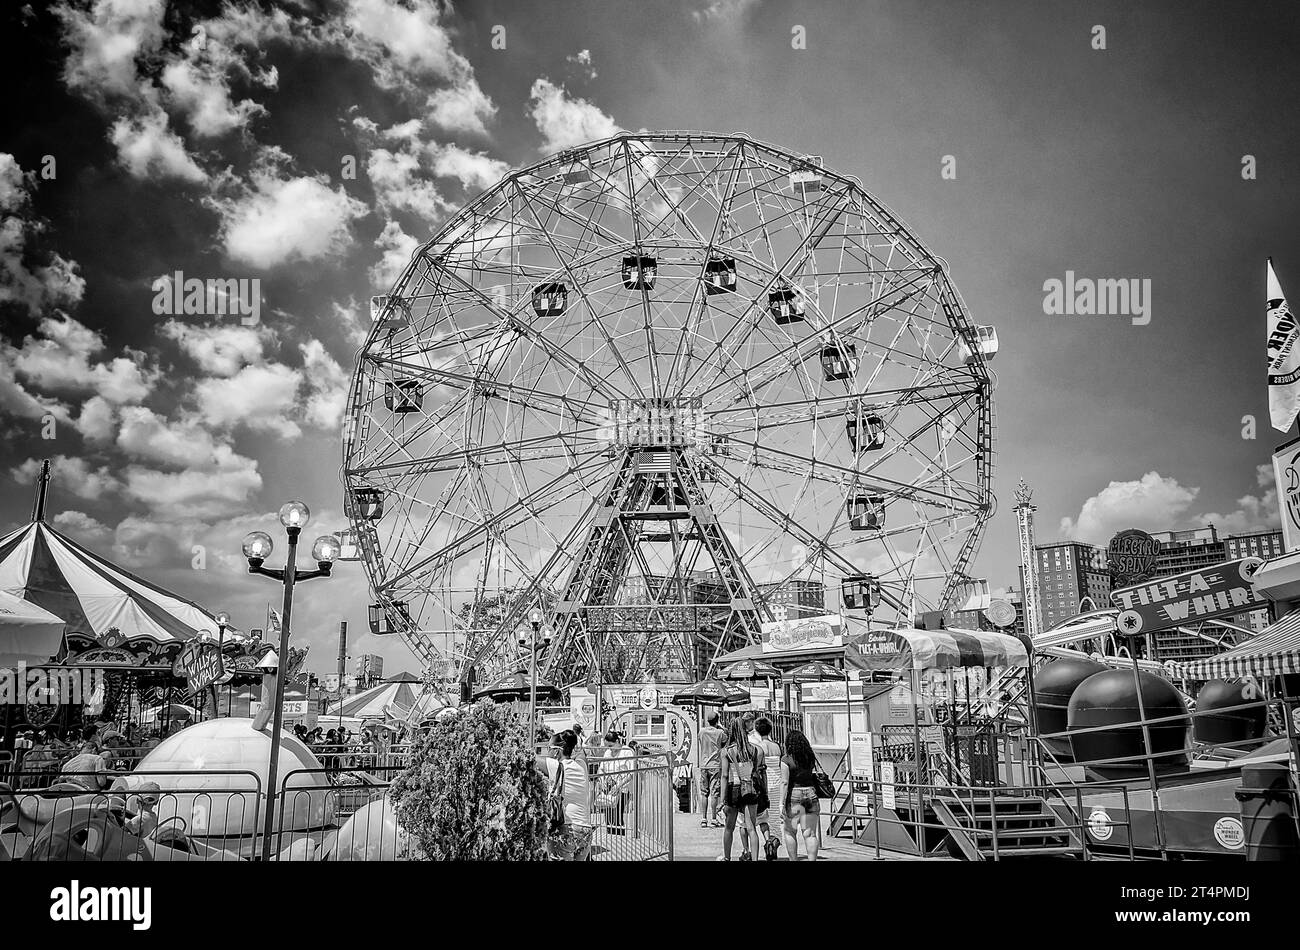 CONEY ISLAND - MAY 30: The famous Wonder Wheel in Coney Island, May 30, 2013. The Eccentric Ferris Wheel was built in 1920, it has 24 fully enclosed c Stock Photo